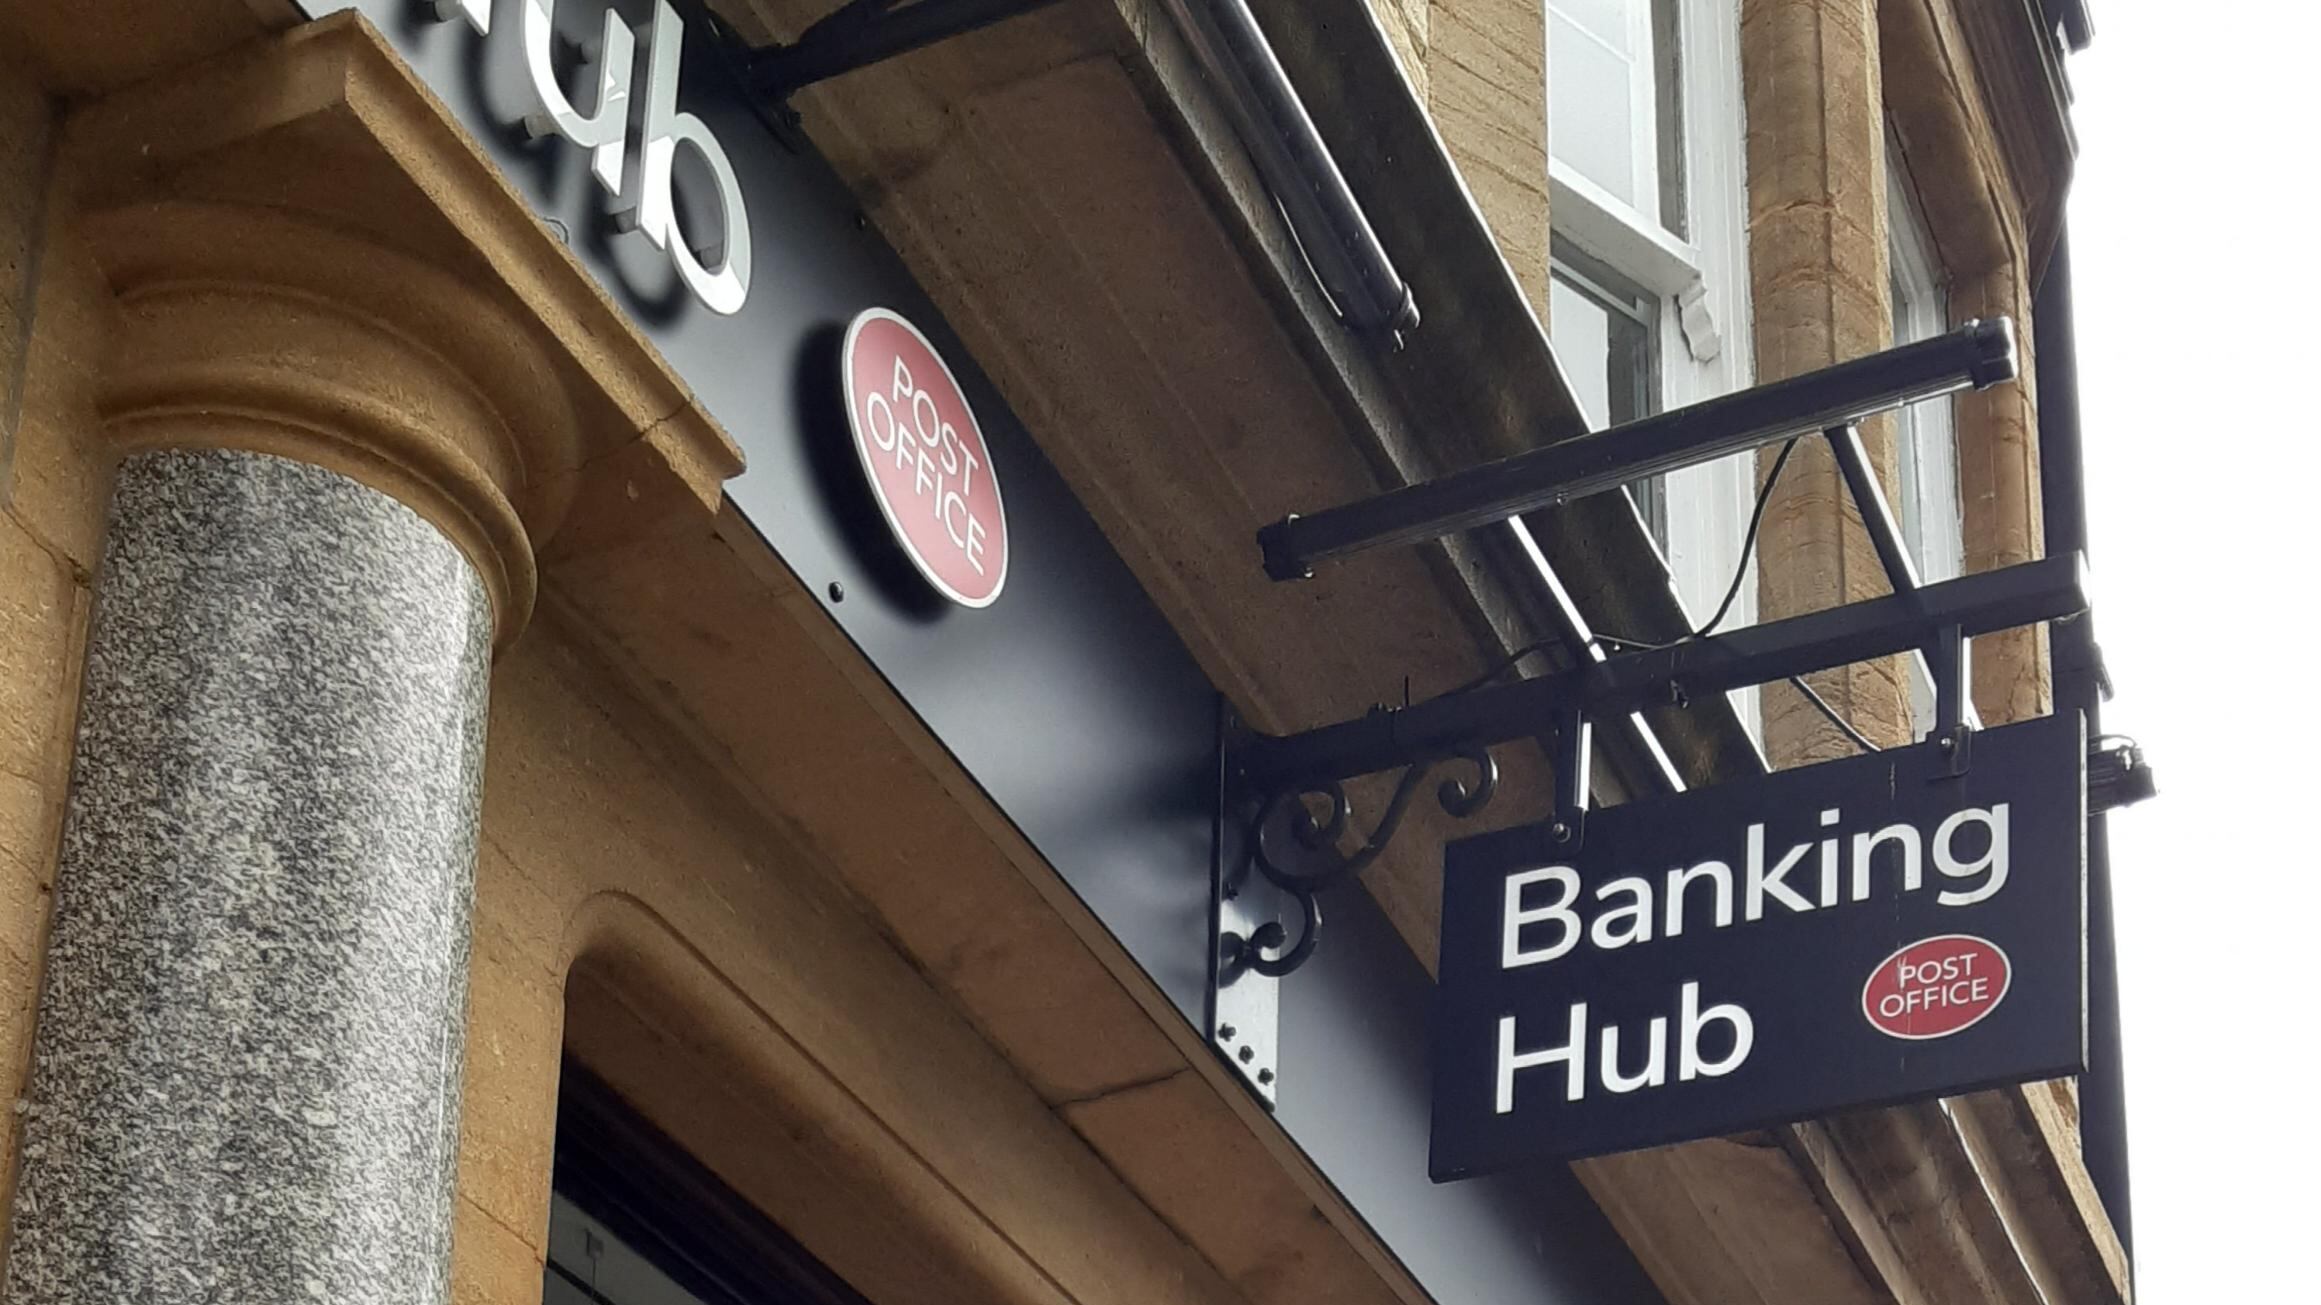 Banking hubs allow staff from several banks to share the same space